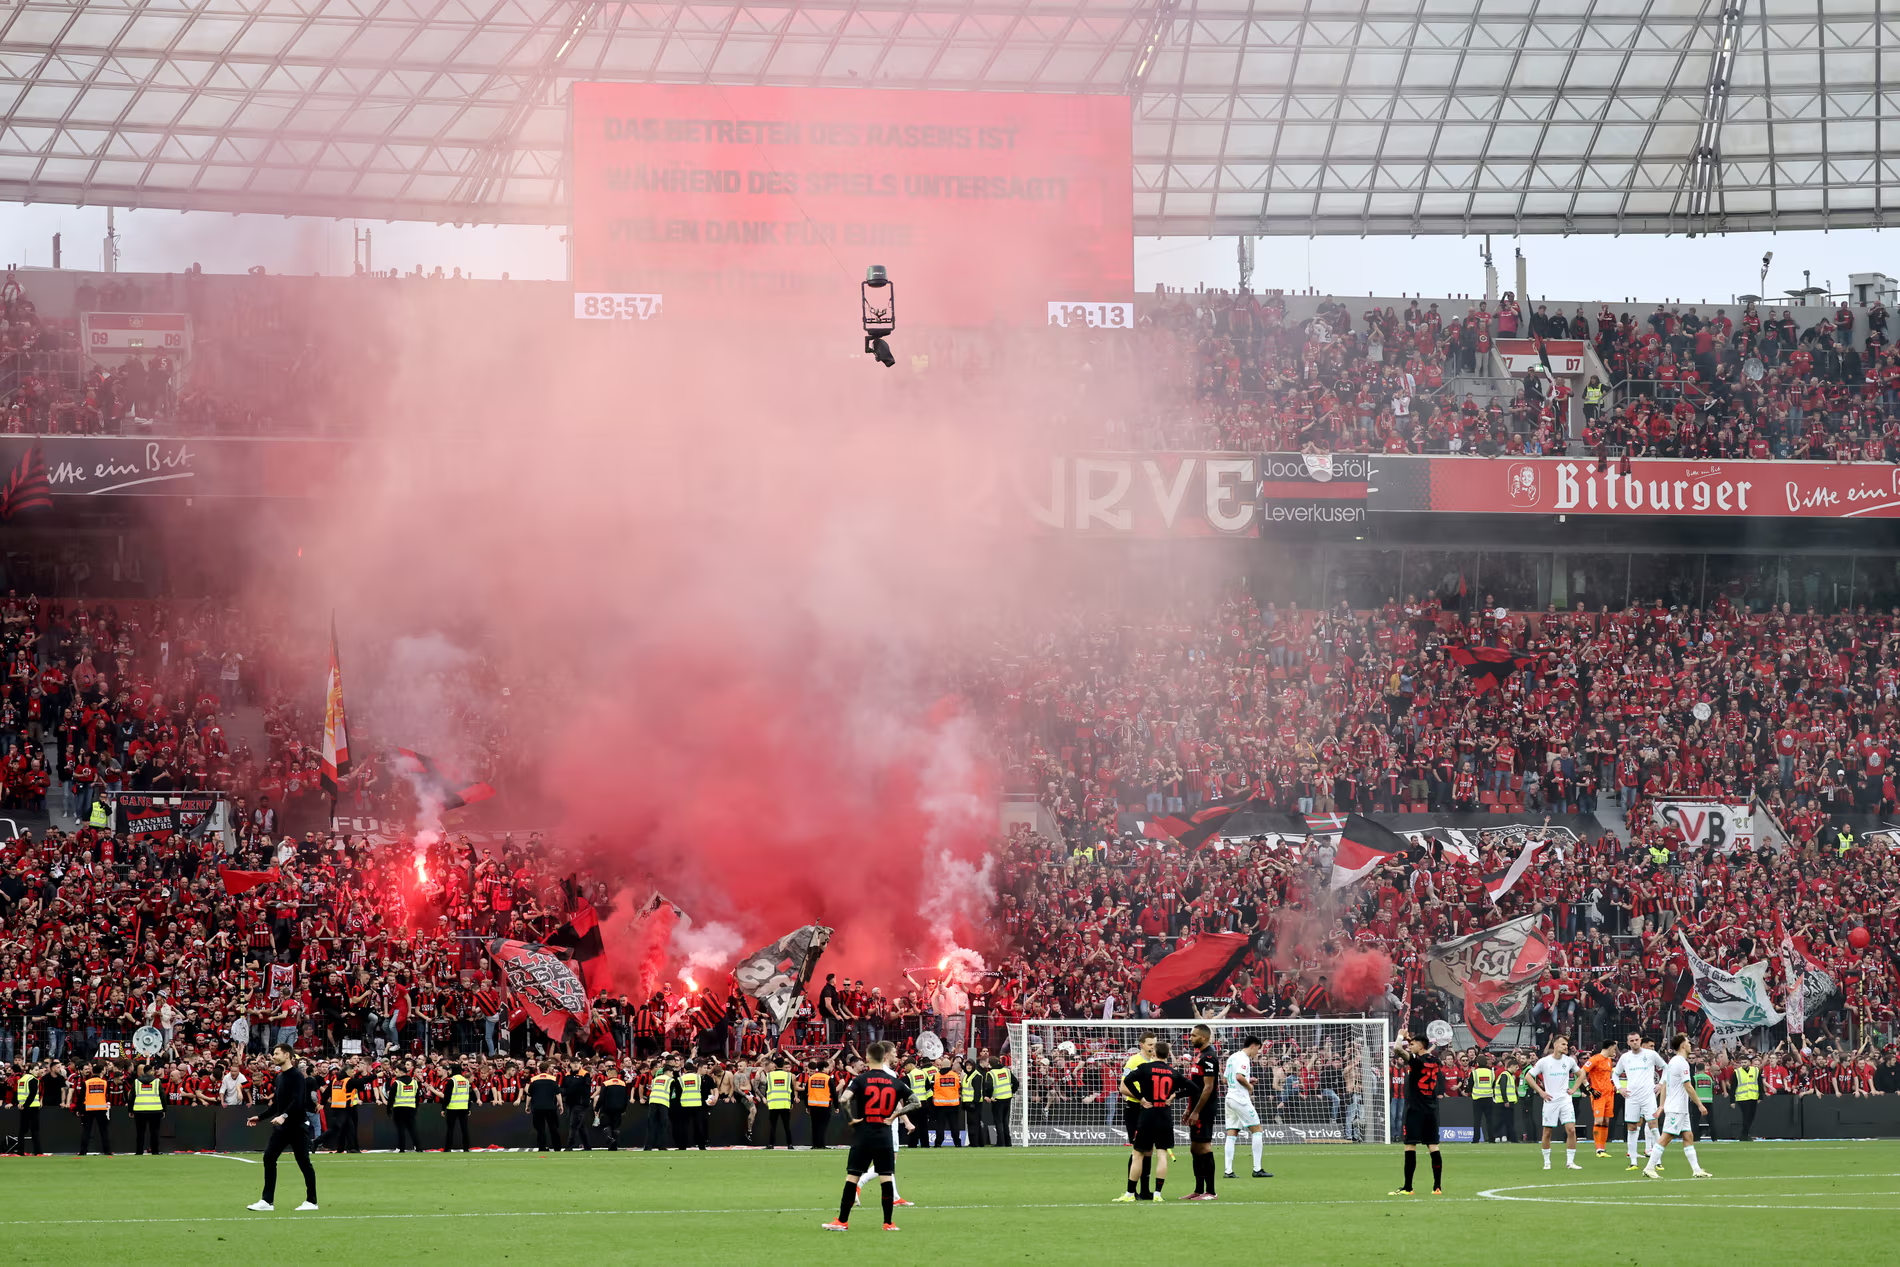 Bayer Leverkusen clinch historic Bundesliga title for the first time in their history